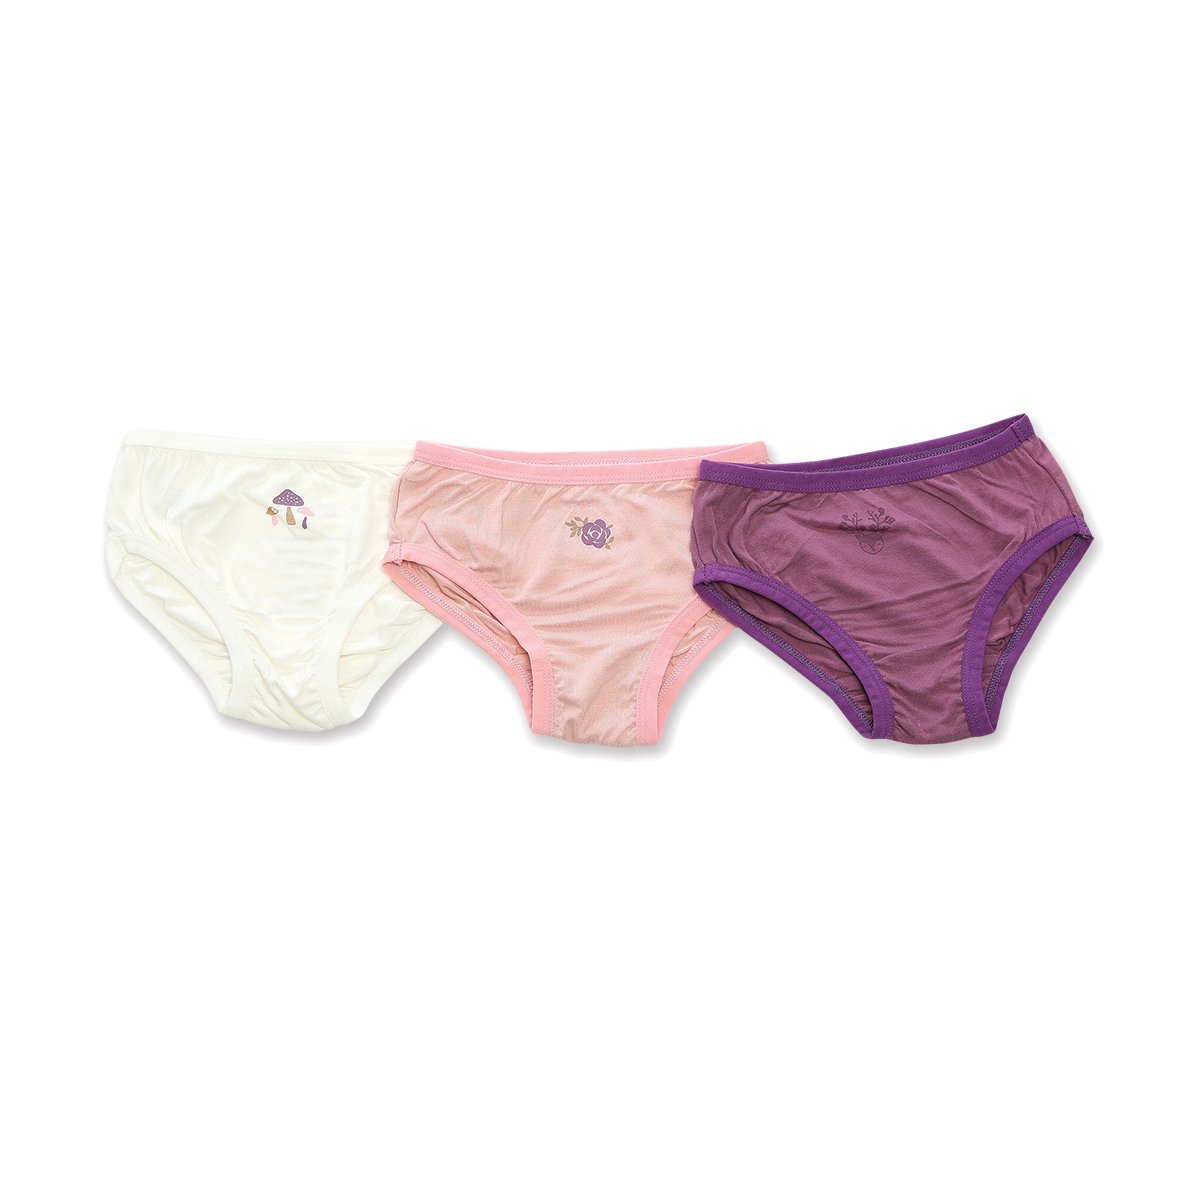 Apricot bamboo fibers period underwear – The Bamboo House